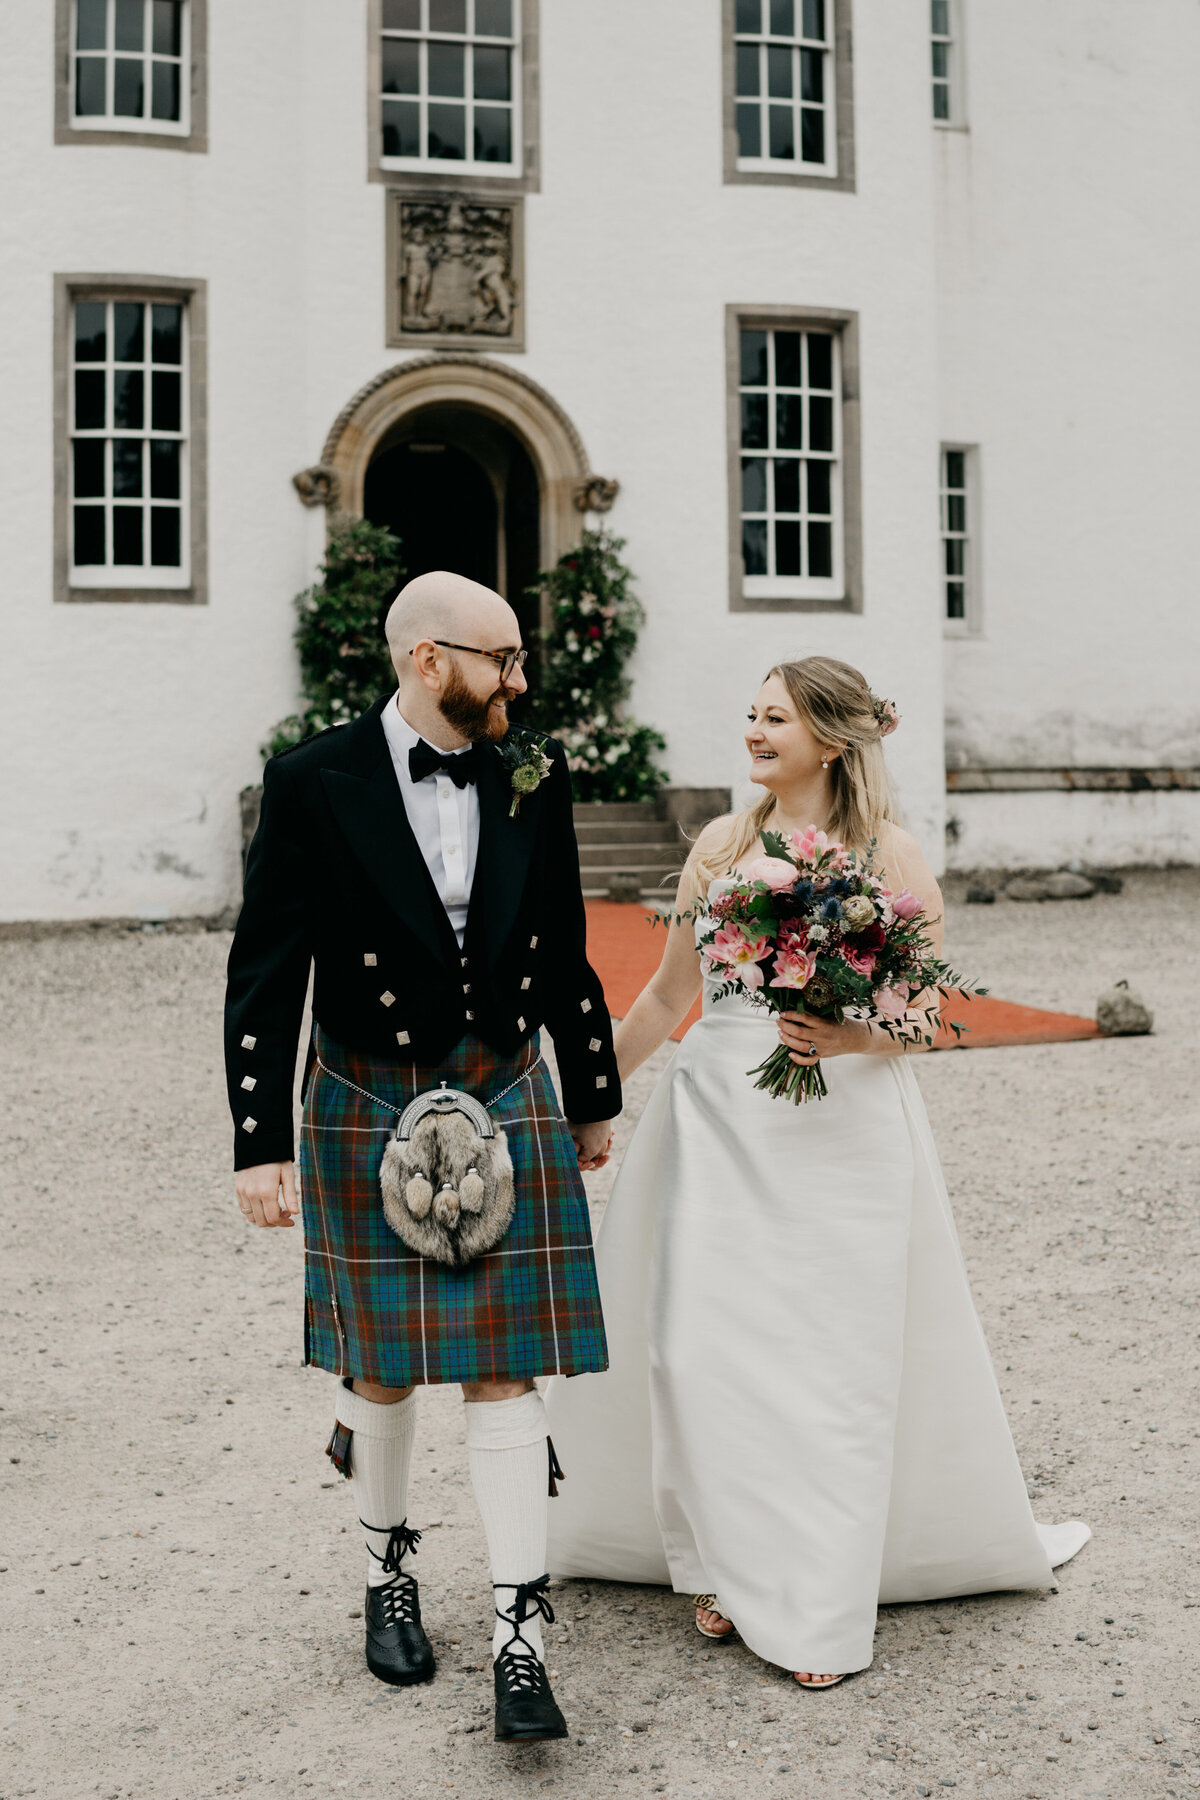 A bride and groom walk hand in hand for photography outside Blair Castle in Perthshire after their wedding ceremony.